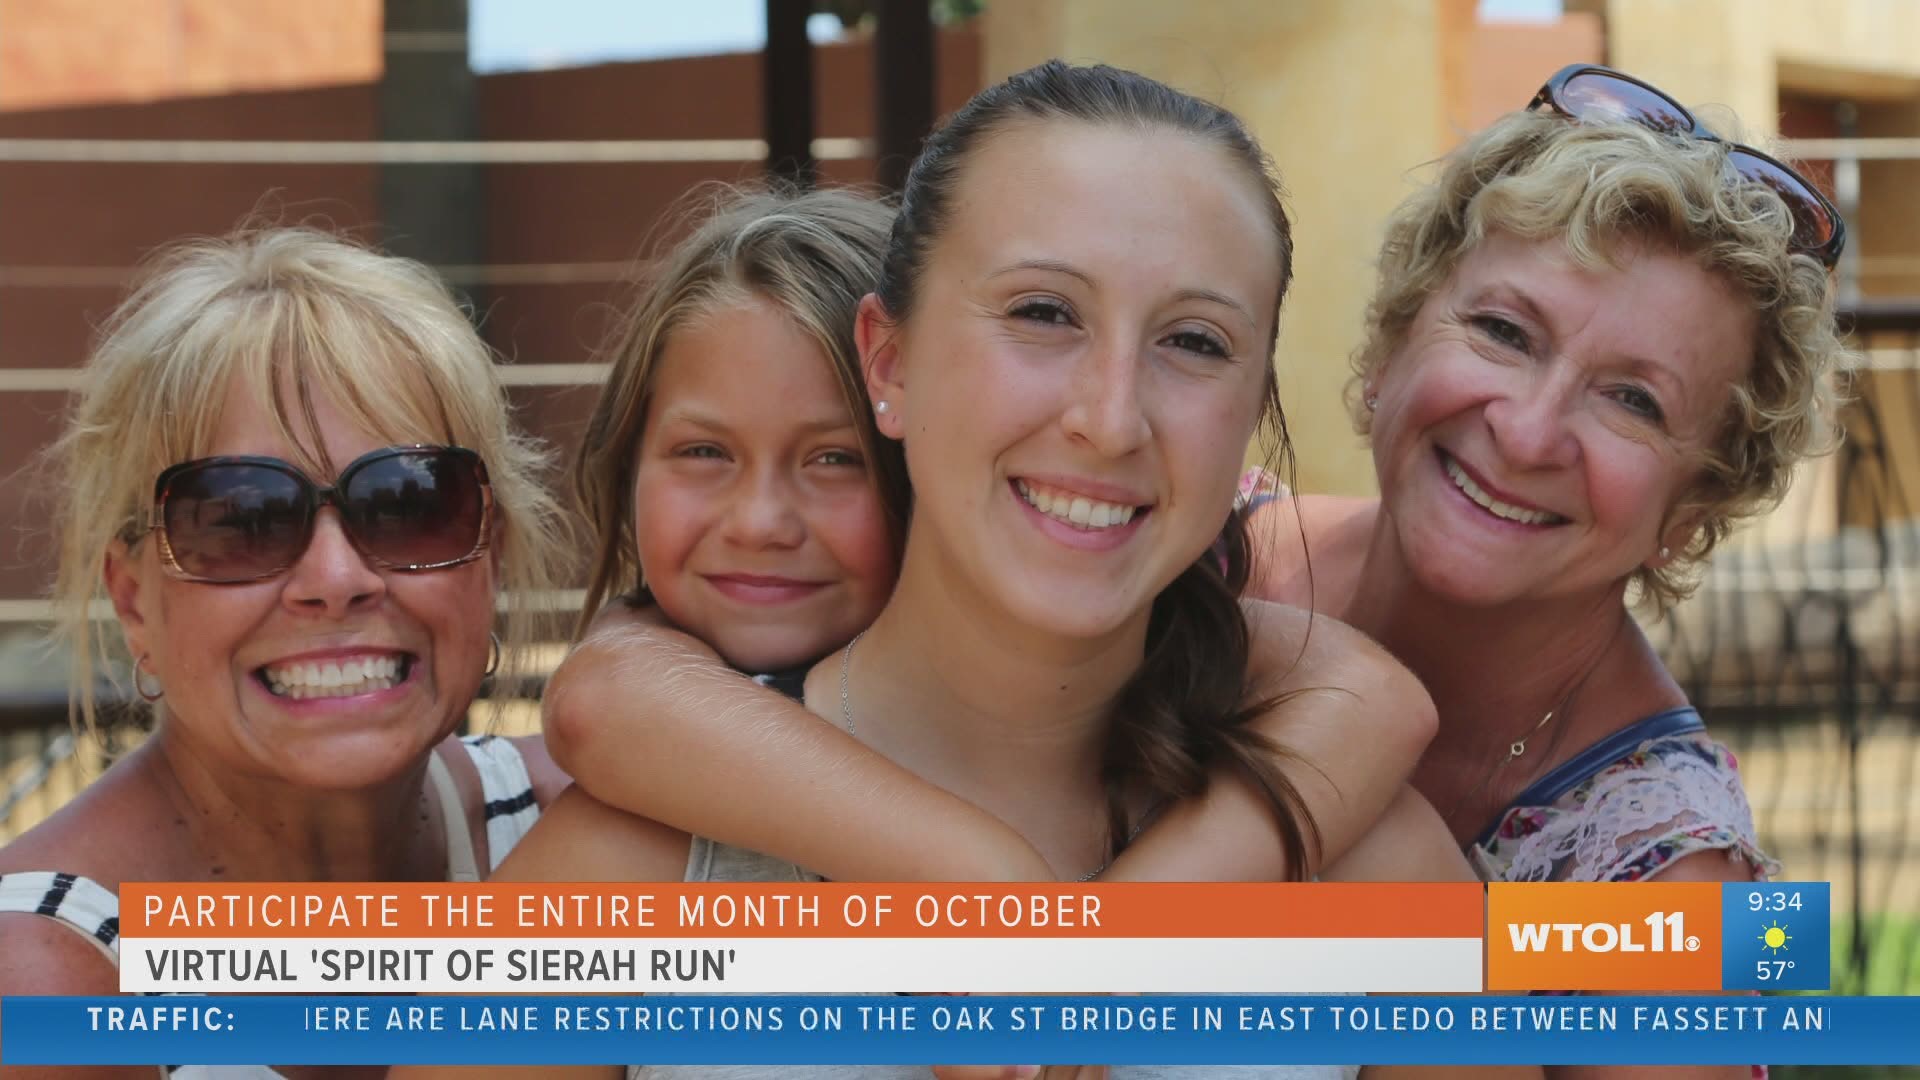 Justice for Sierah is protecting women no matter what. Here's how to participate in the virtual "Spirit of Sierah Run" this year!